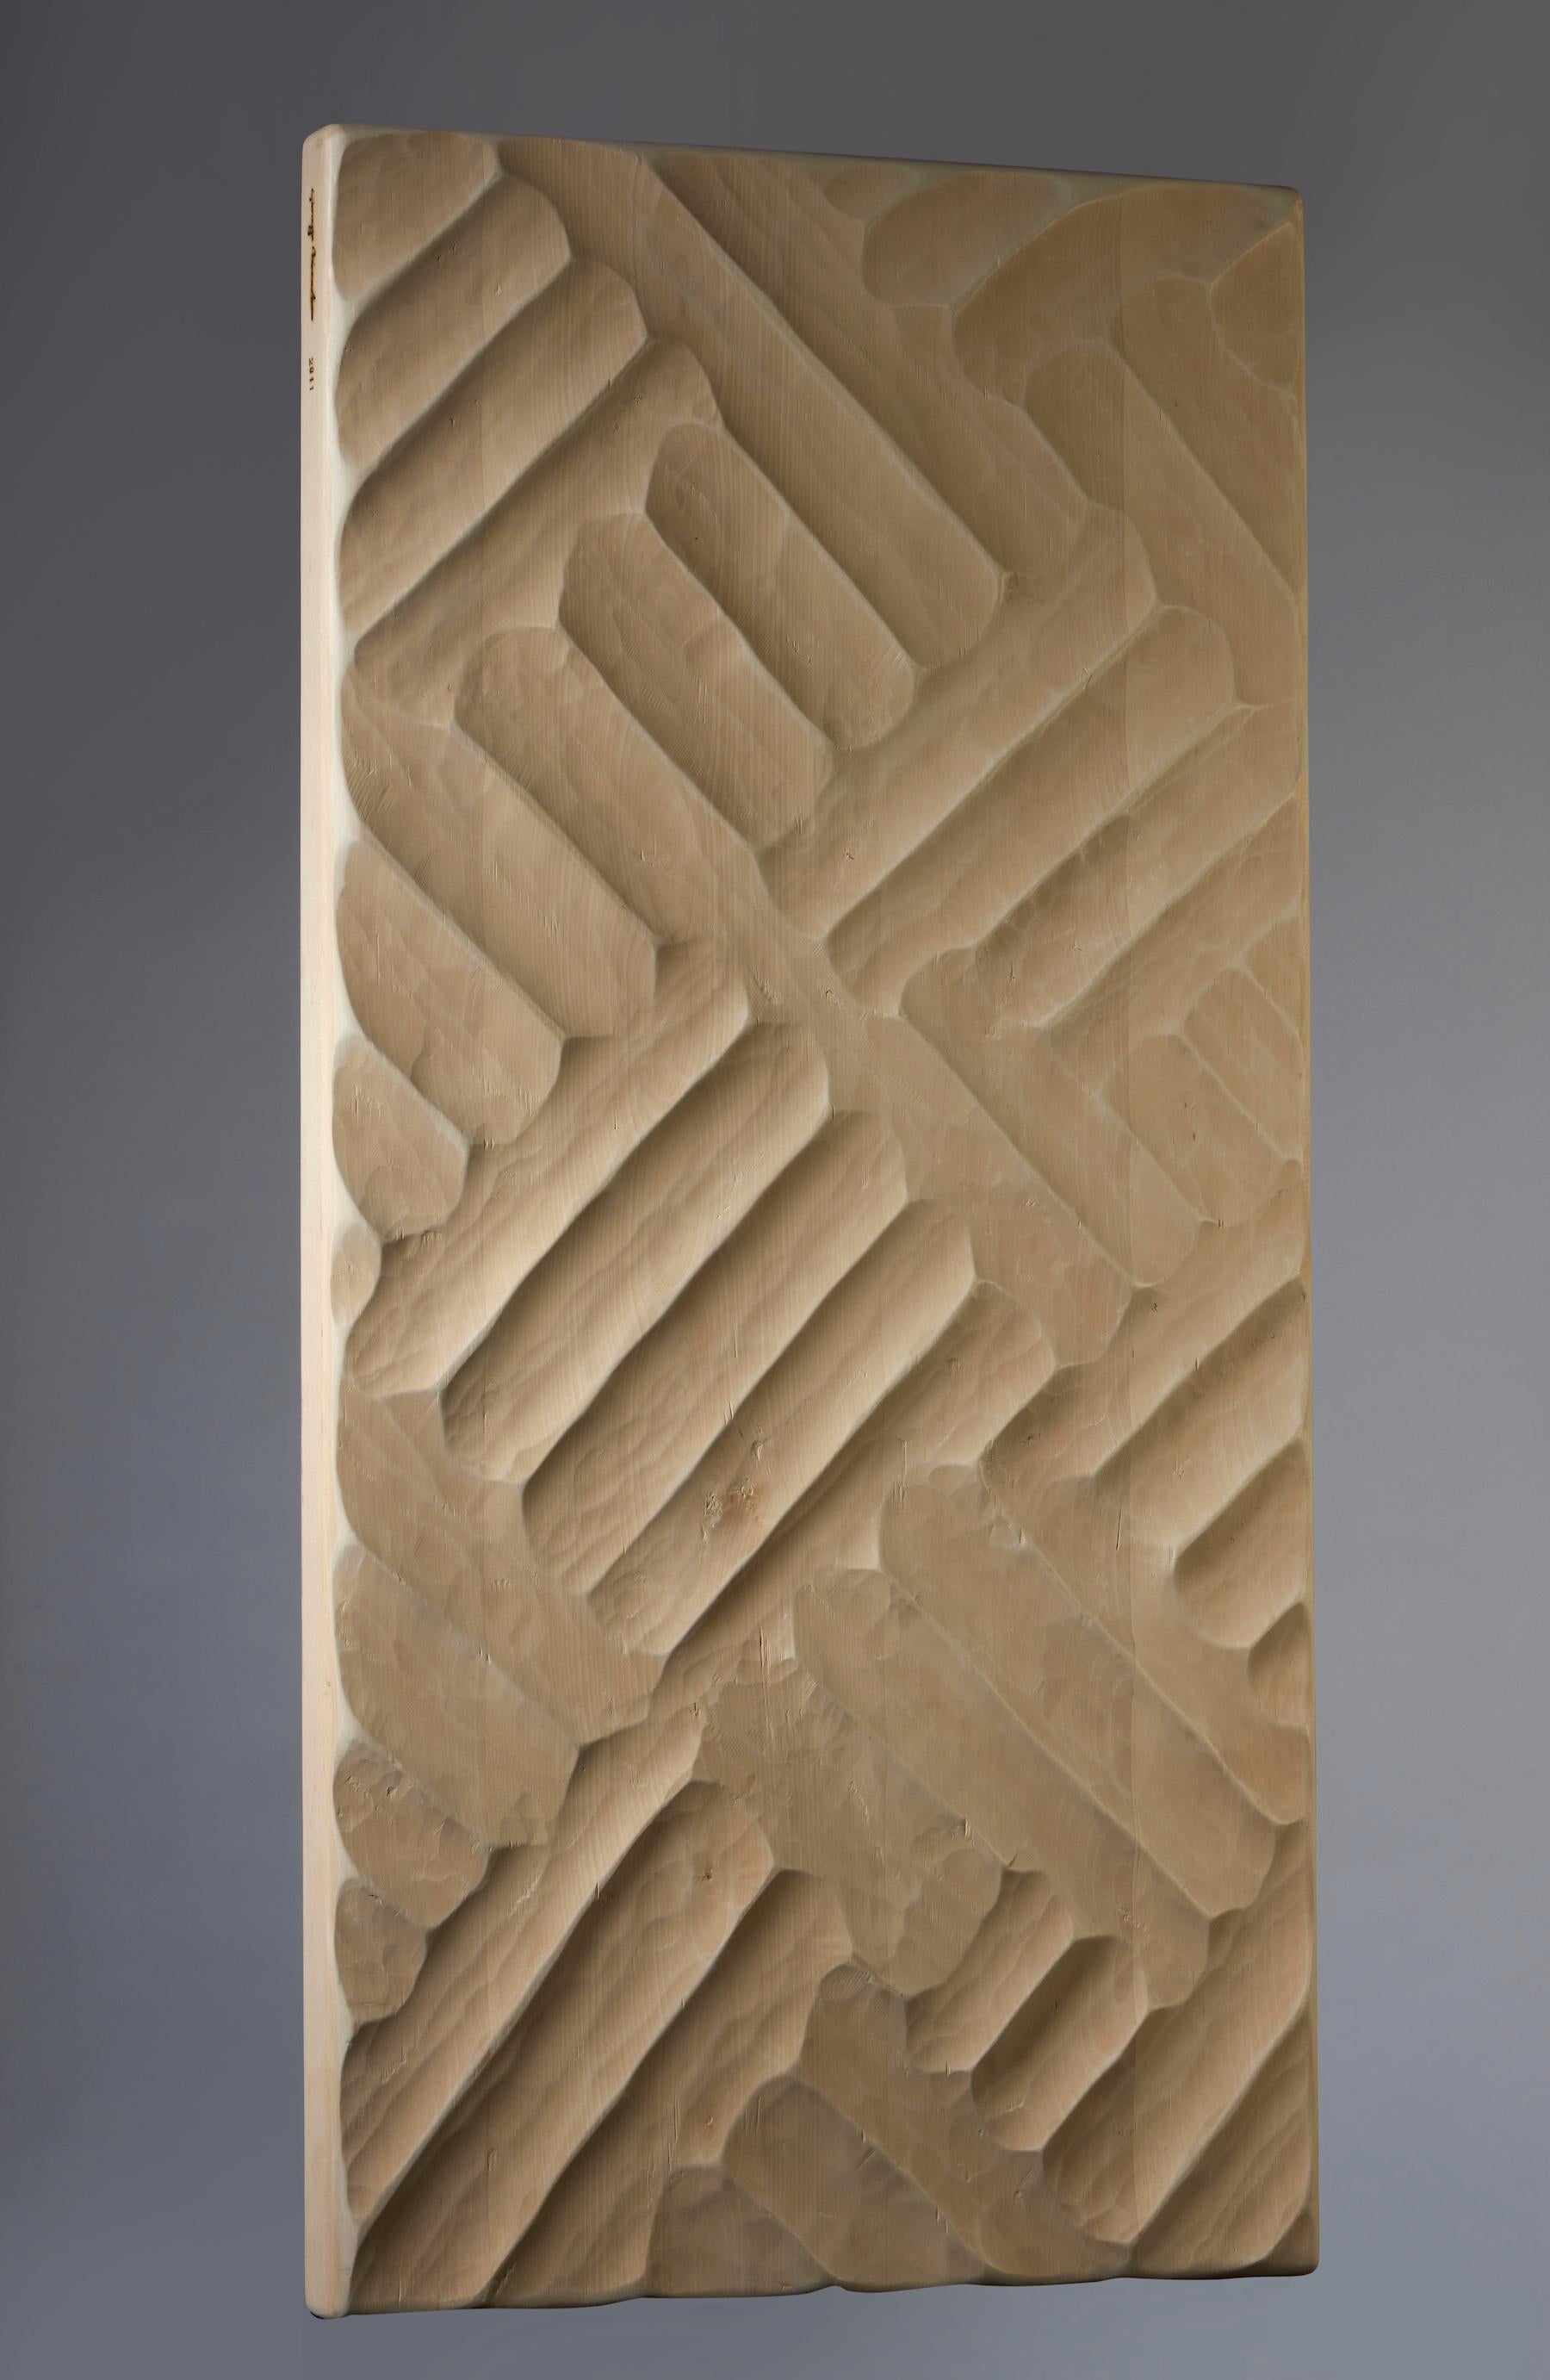 Giuseppe Rivadossi (Nave, July 8, 1935)

Carved panel, 2011

Dimensions: 59.2 x 120 x 5.5 cm

With this panel  hand-carved Master Giuseppe Rivadossi created, repeating in form and quality of execution the ornamentation technique  used by him for the